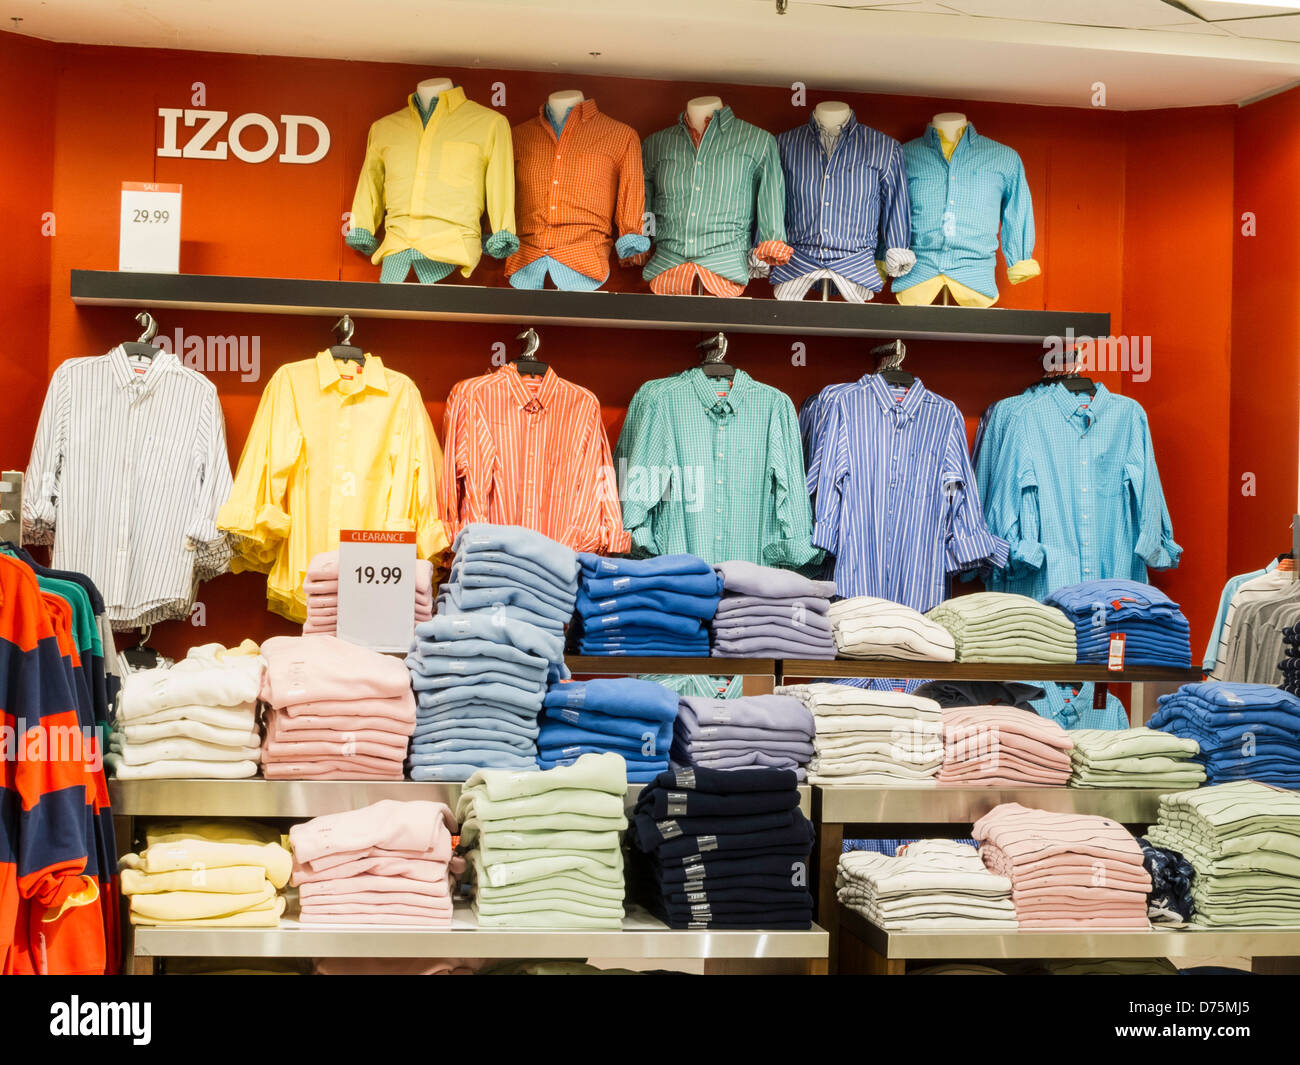 How do you find an IZOD clothing outlet?